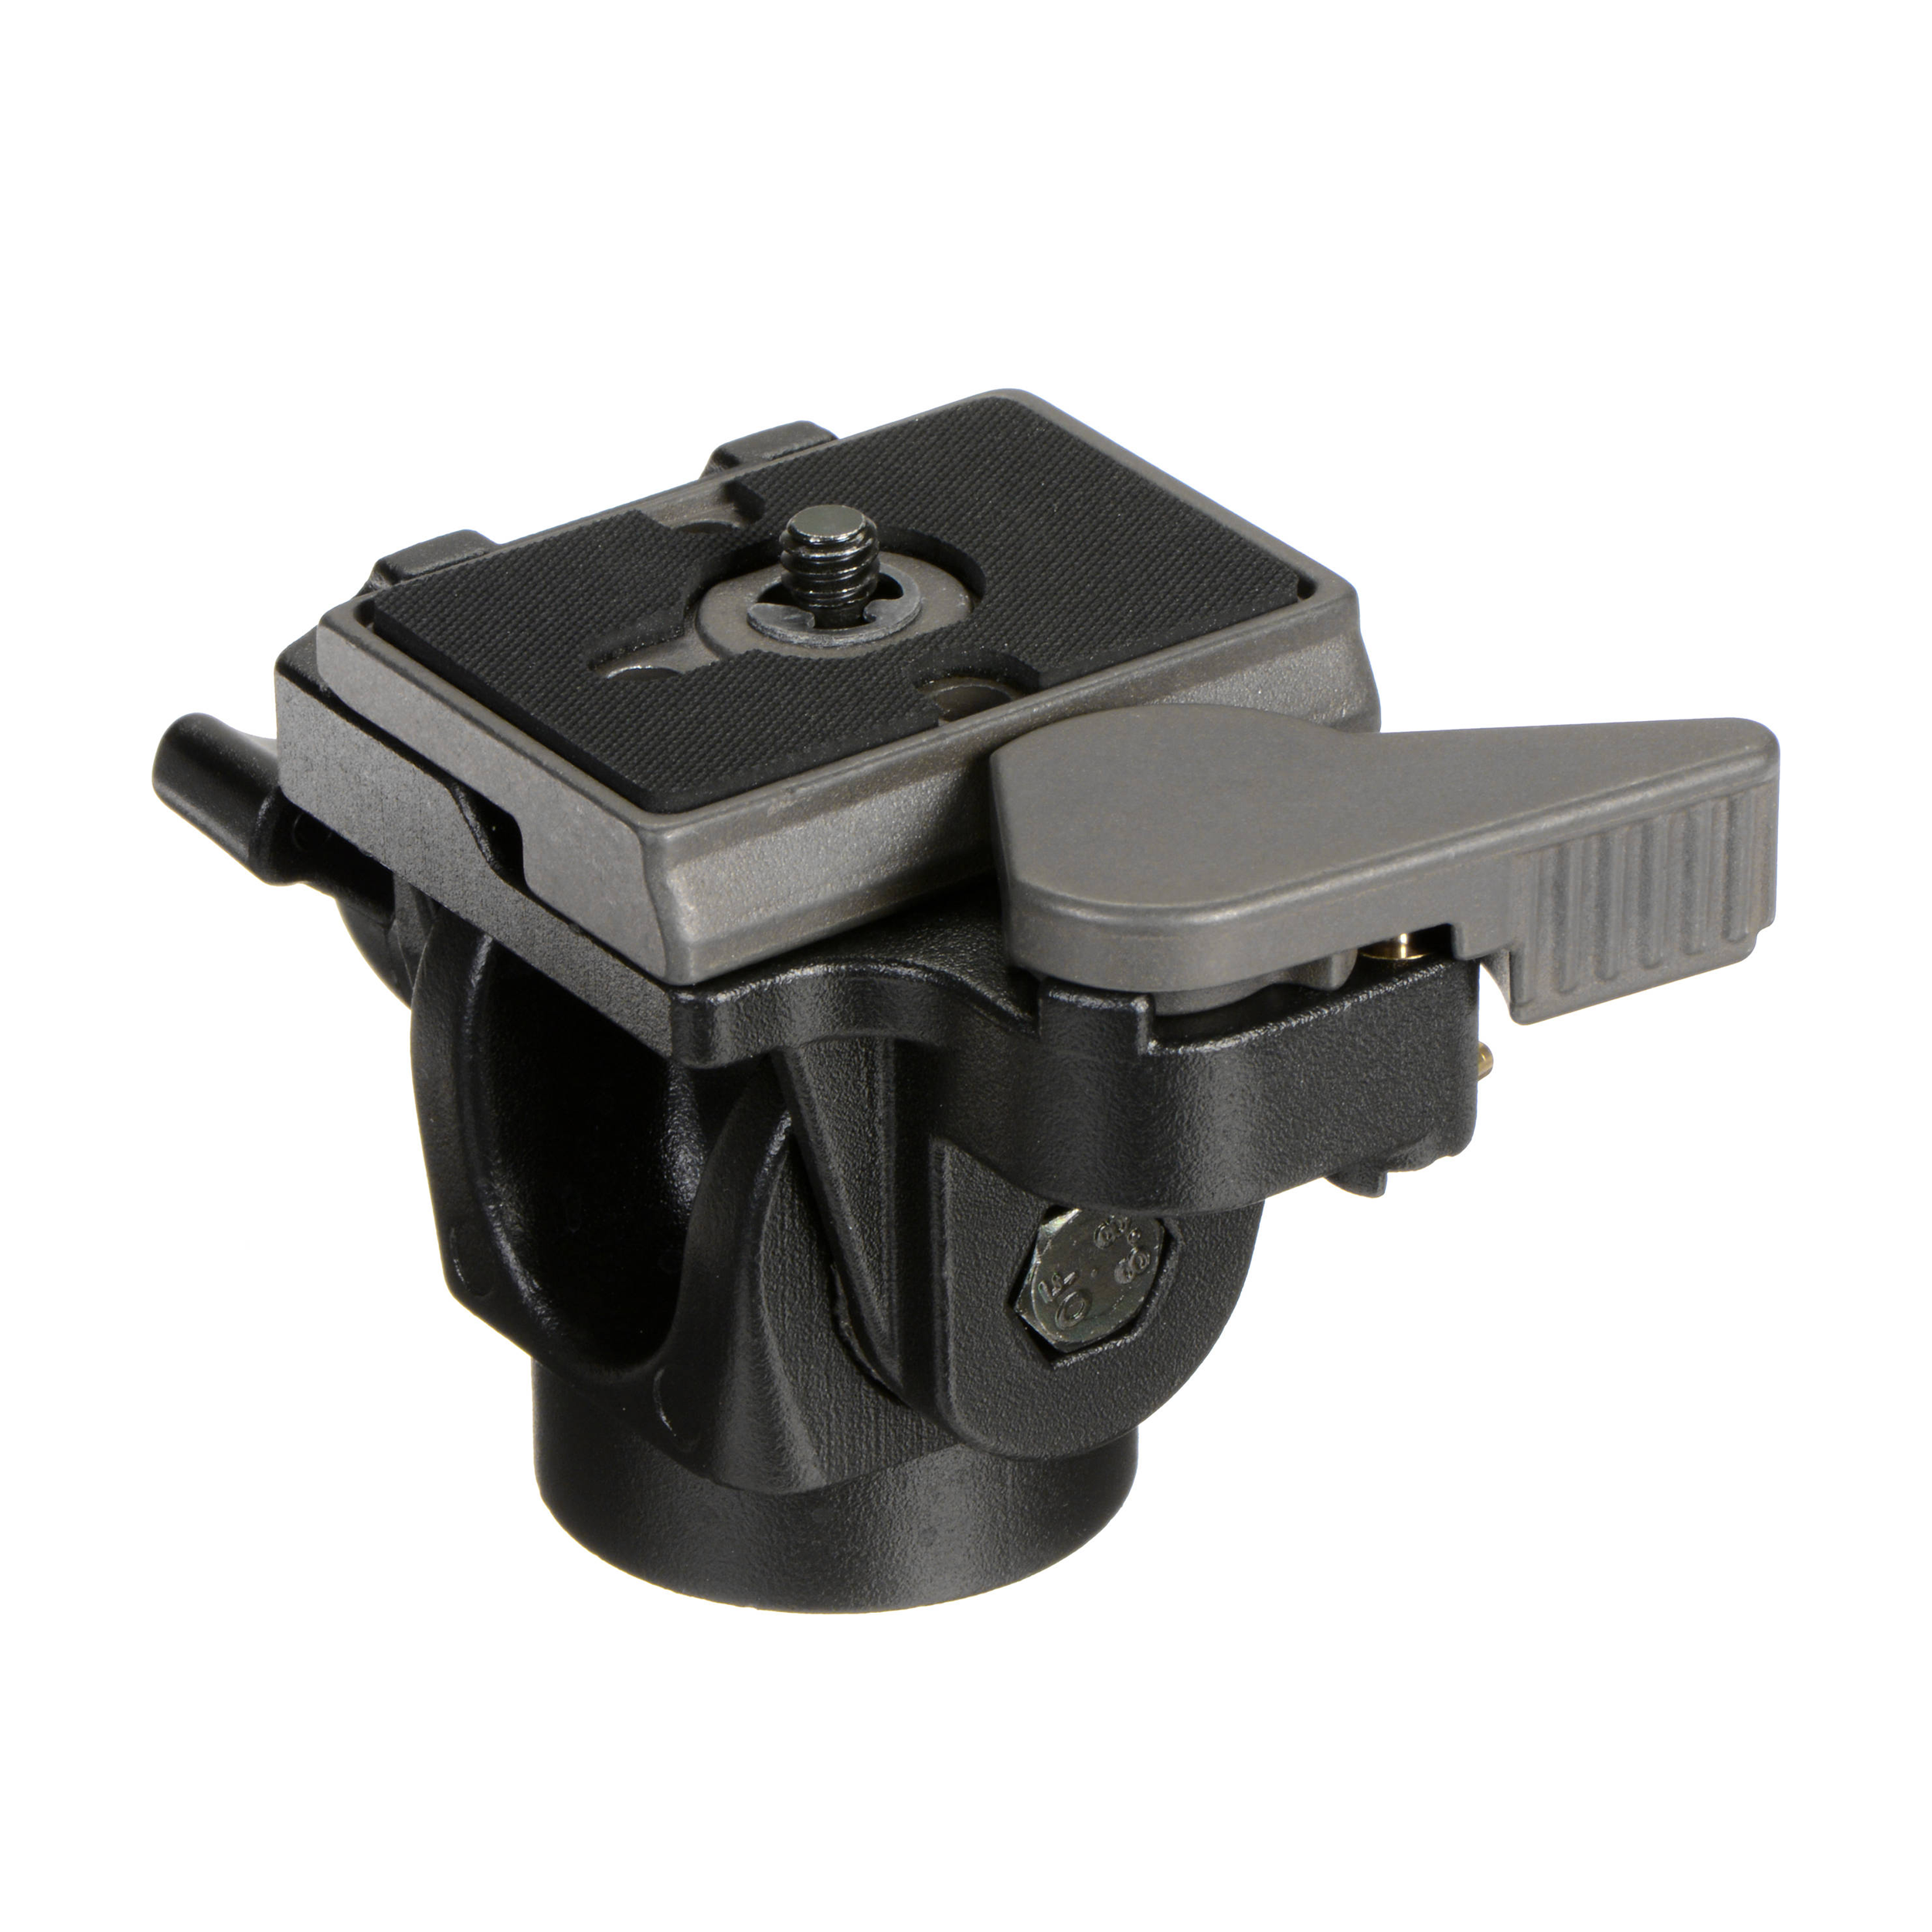 Manfrotto 234RC Tilt Head for Monopods, with Quick Release